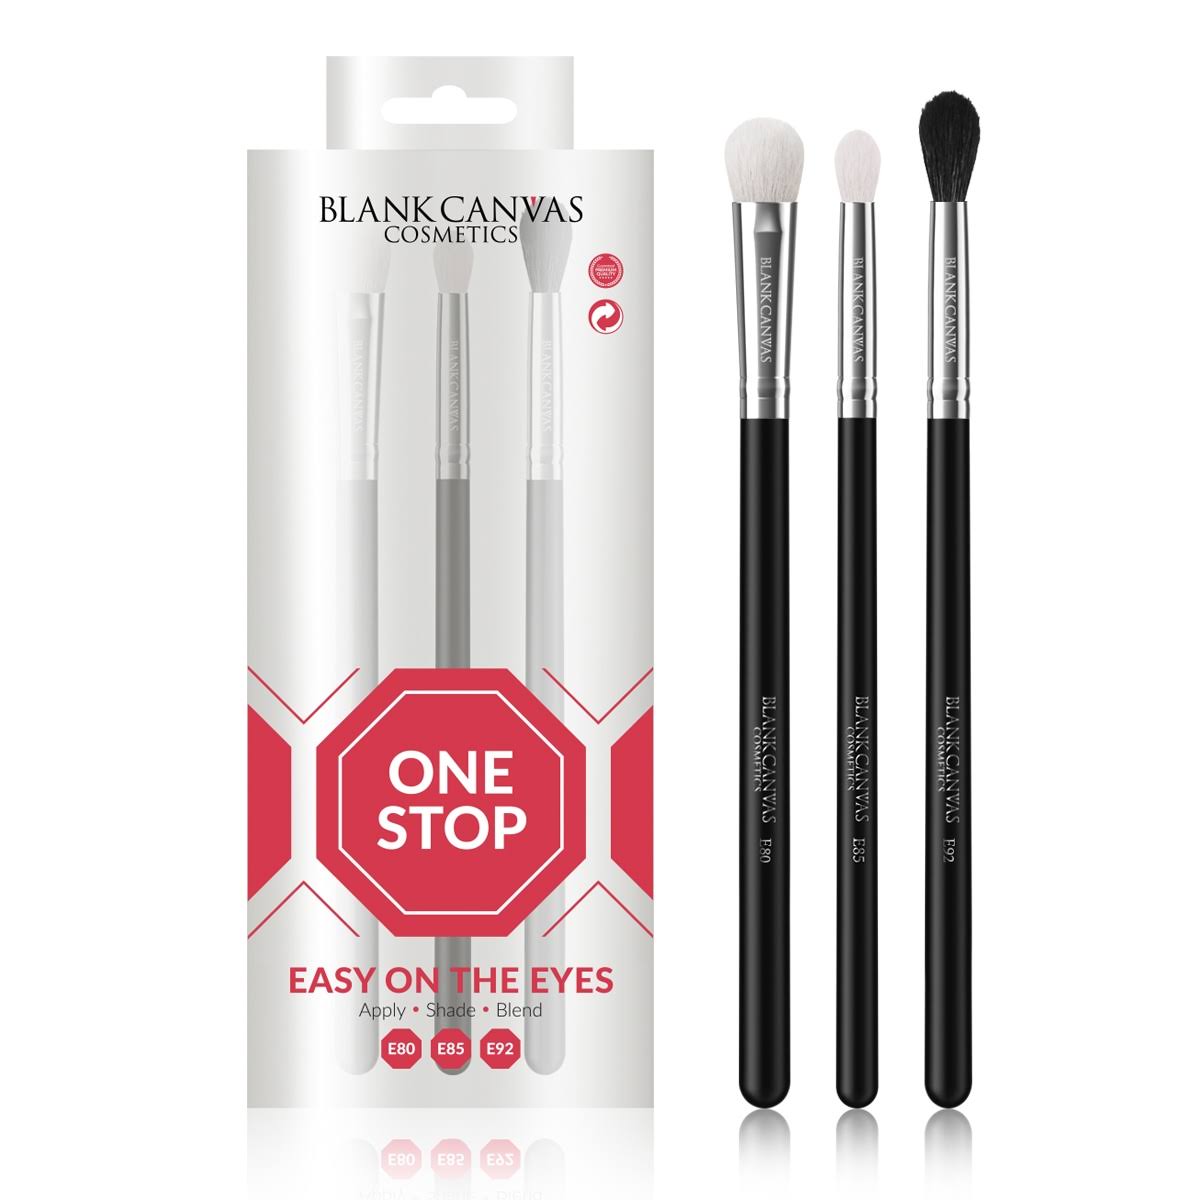 Blank Canvas Cosmetics One Stop Easy on The Eyes